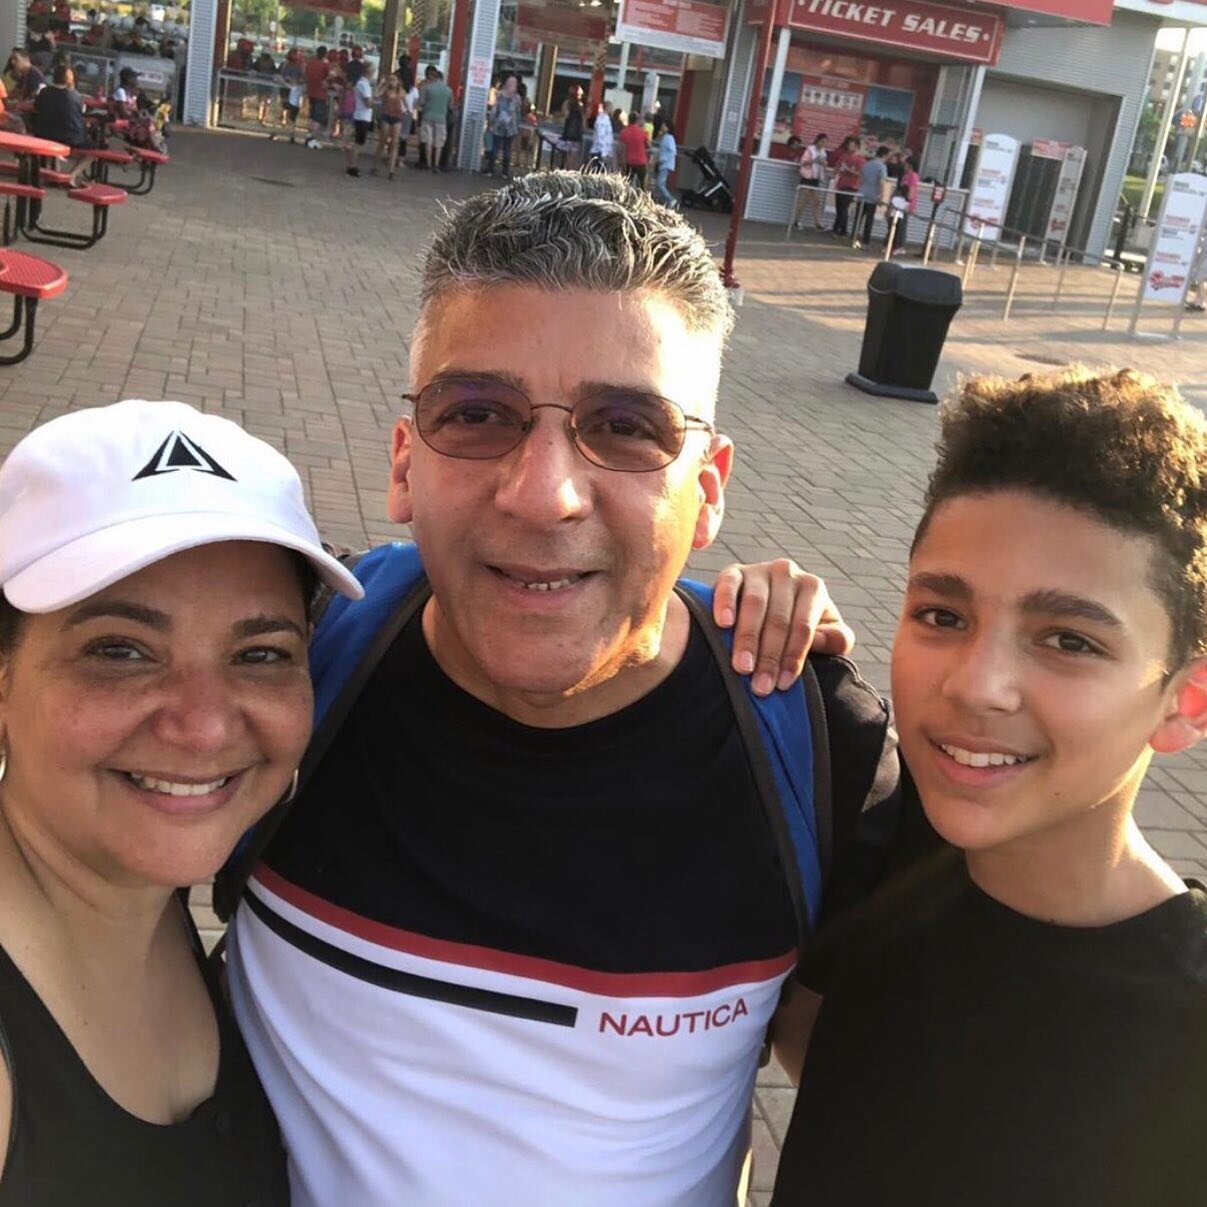 @mcas305 living limitless with her family in Ontario, Canada. #LiveLimitless #LimitlessLegends #Travel #Family #UnleashYourPotential #CreateYourLegacy